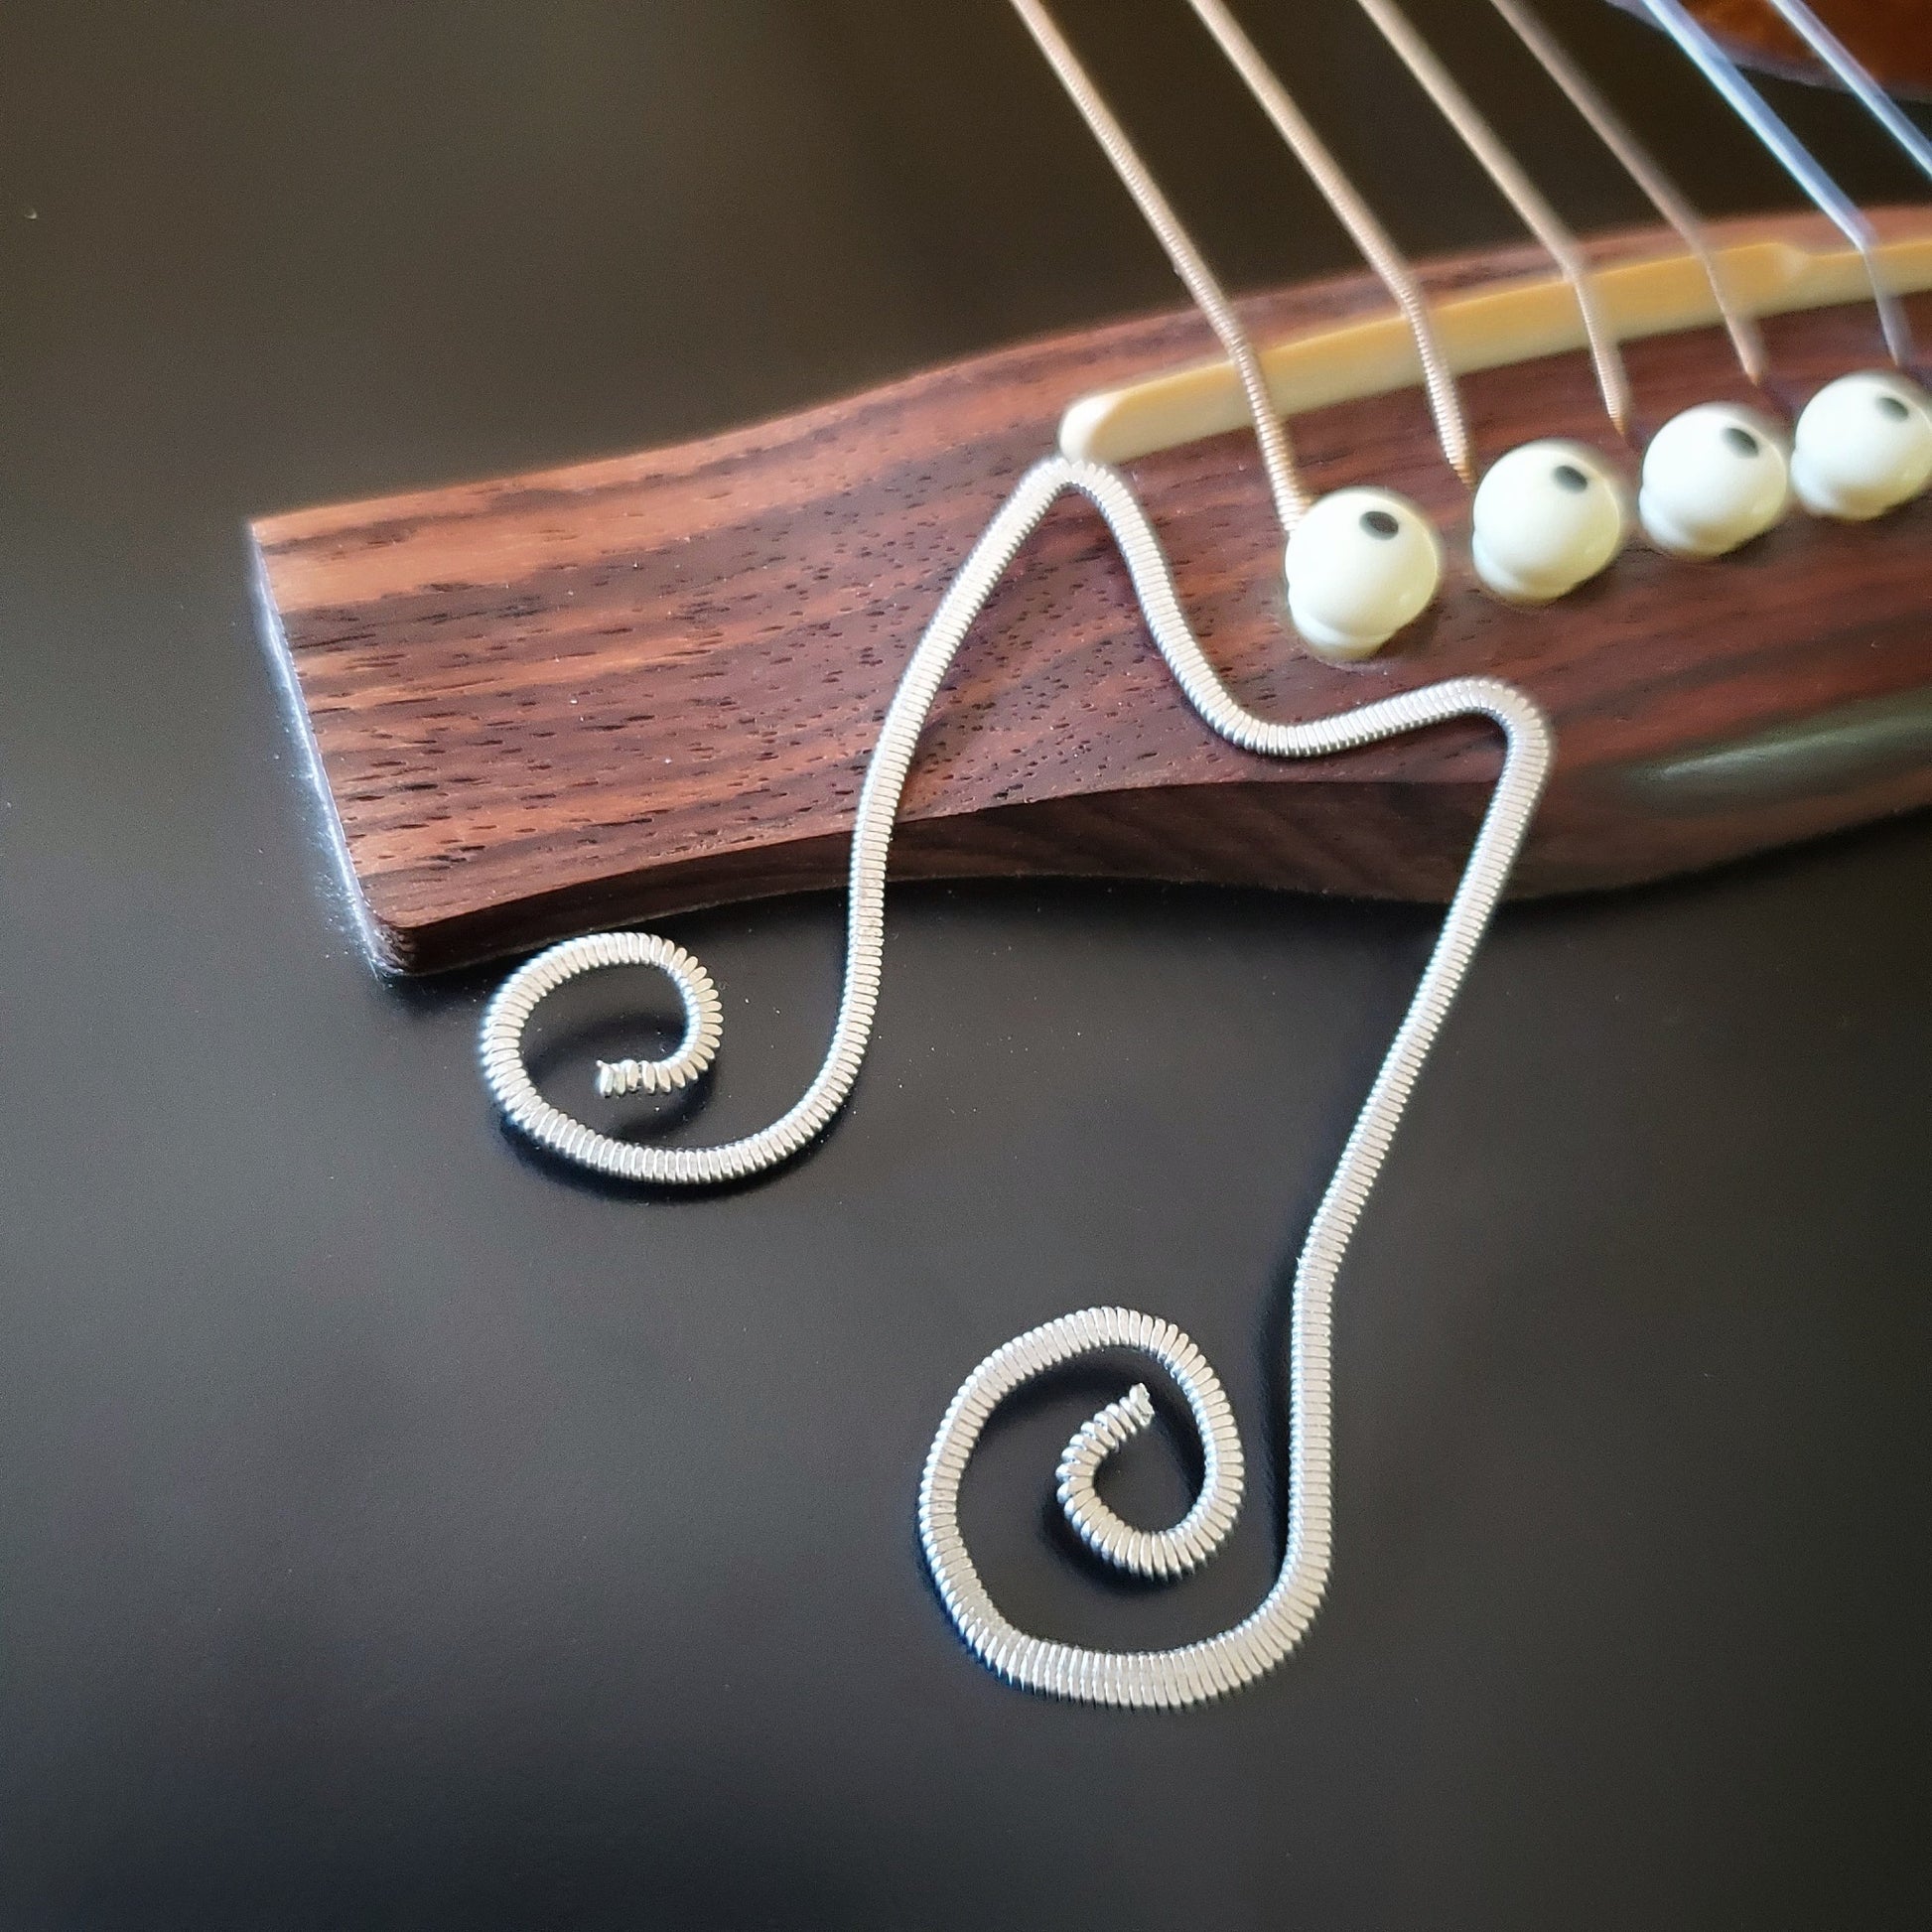 bookmark shaped like a double quarter note made from a hammered guitar string - bookmark is lying on the bridge of a black guitar